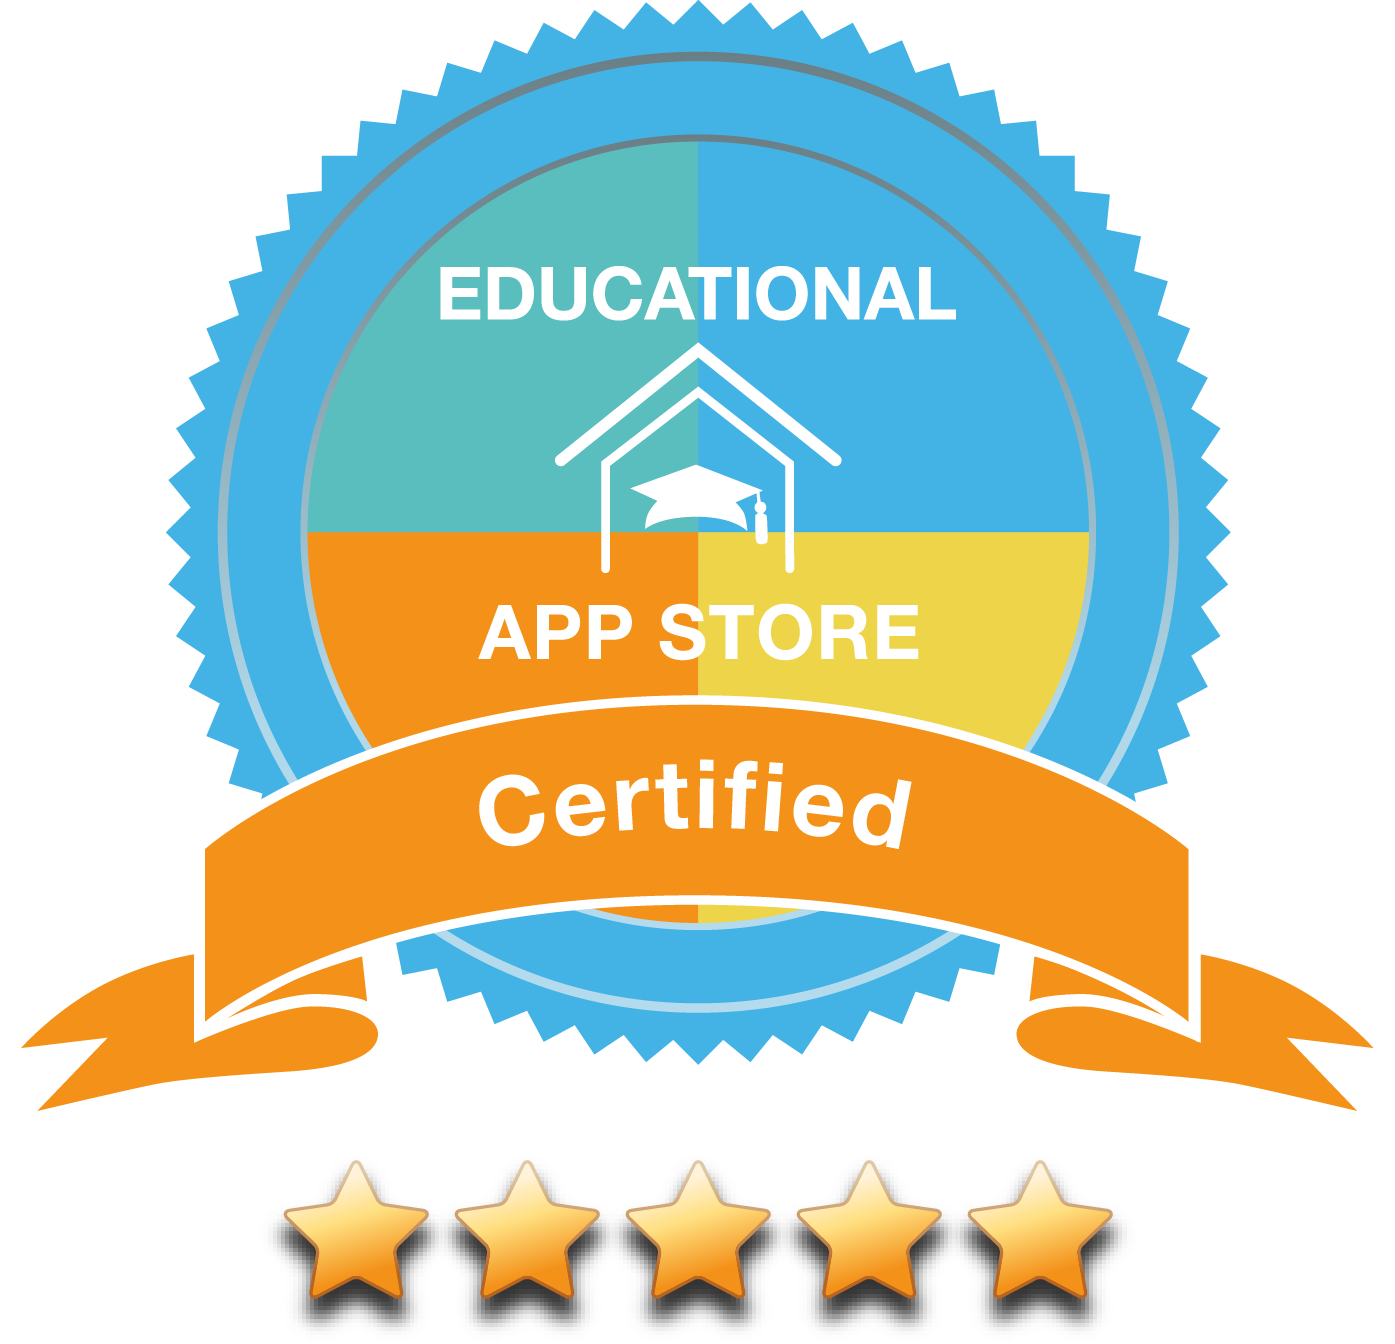 What Makes an App Truly Educational? Four Things to Check Out